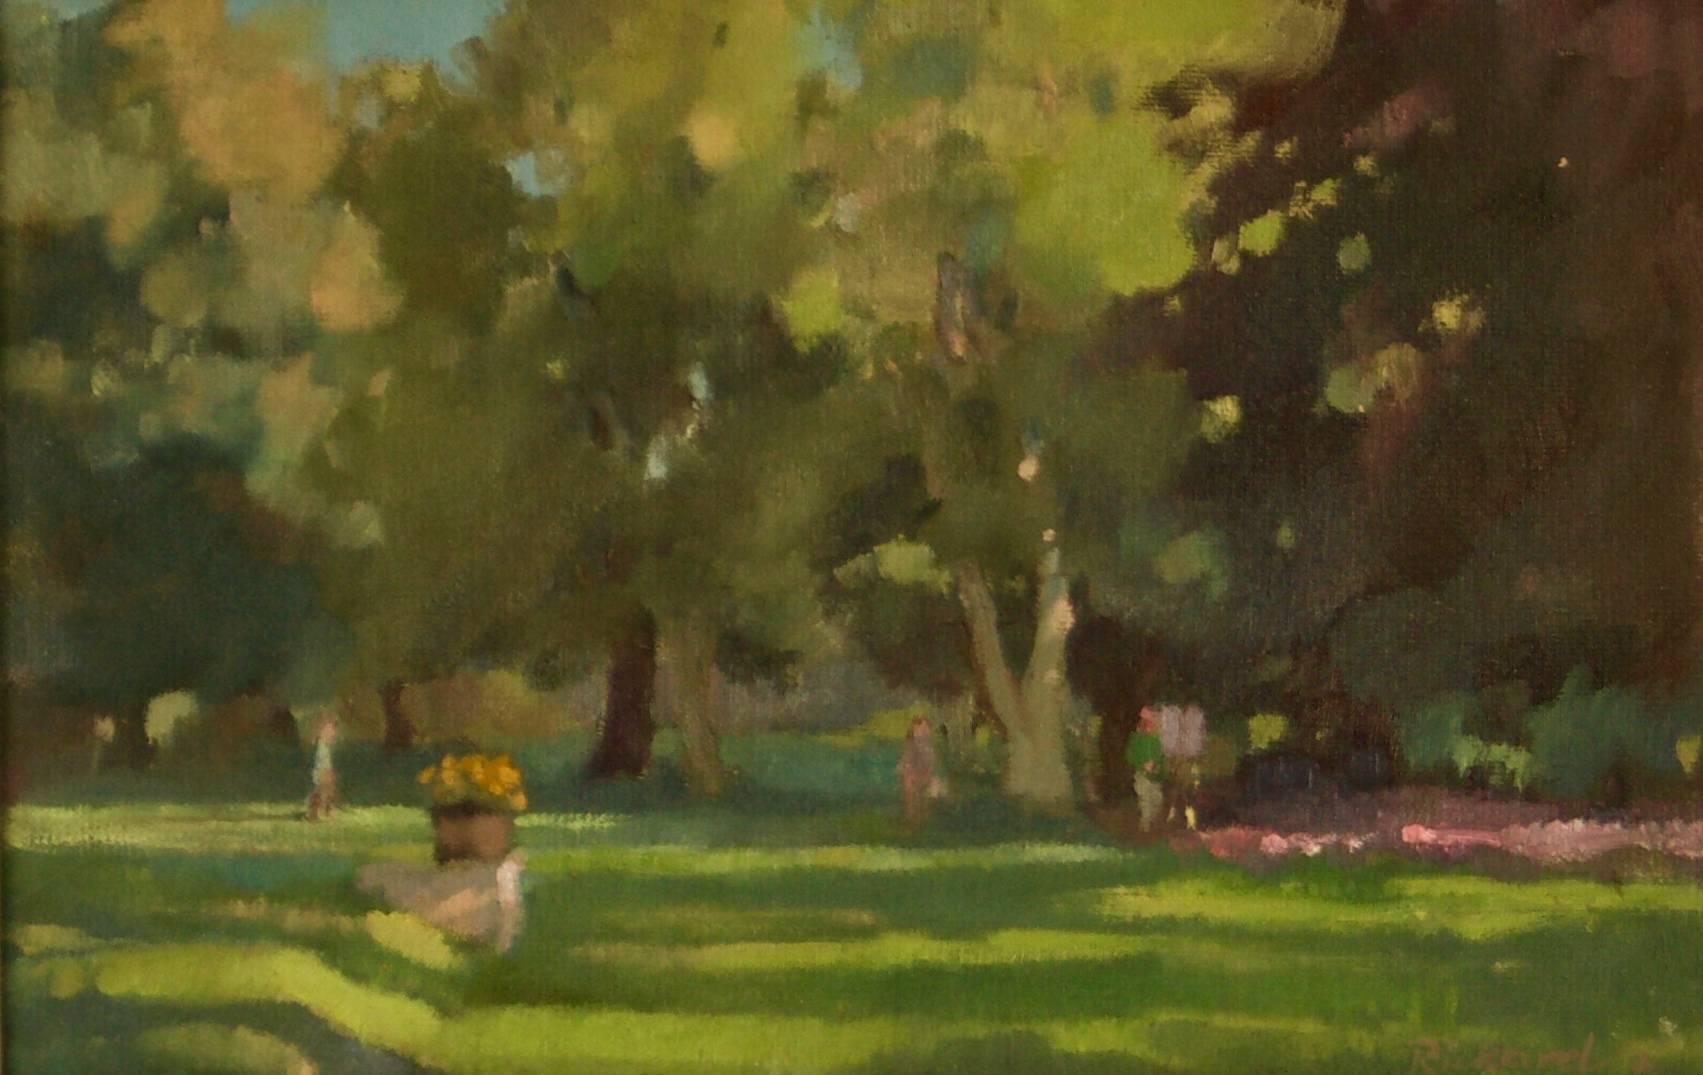 Anthony Rickards Landscape Painting - Summer Park 2 - Mid 20th Century Impressionist Landscape Oil by Rickards